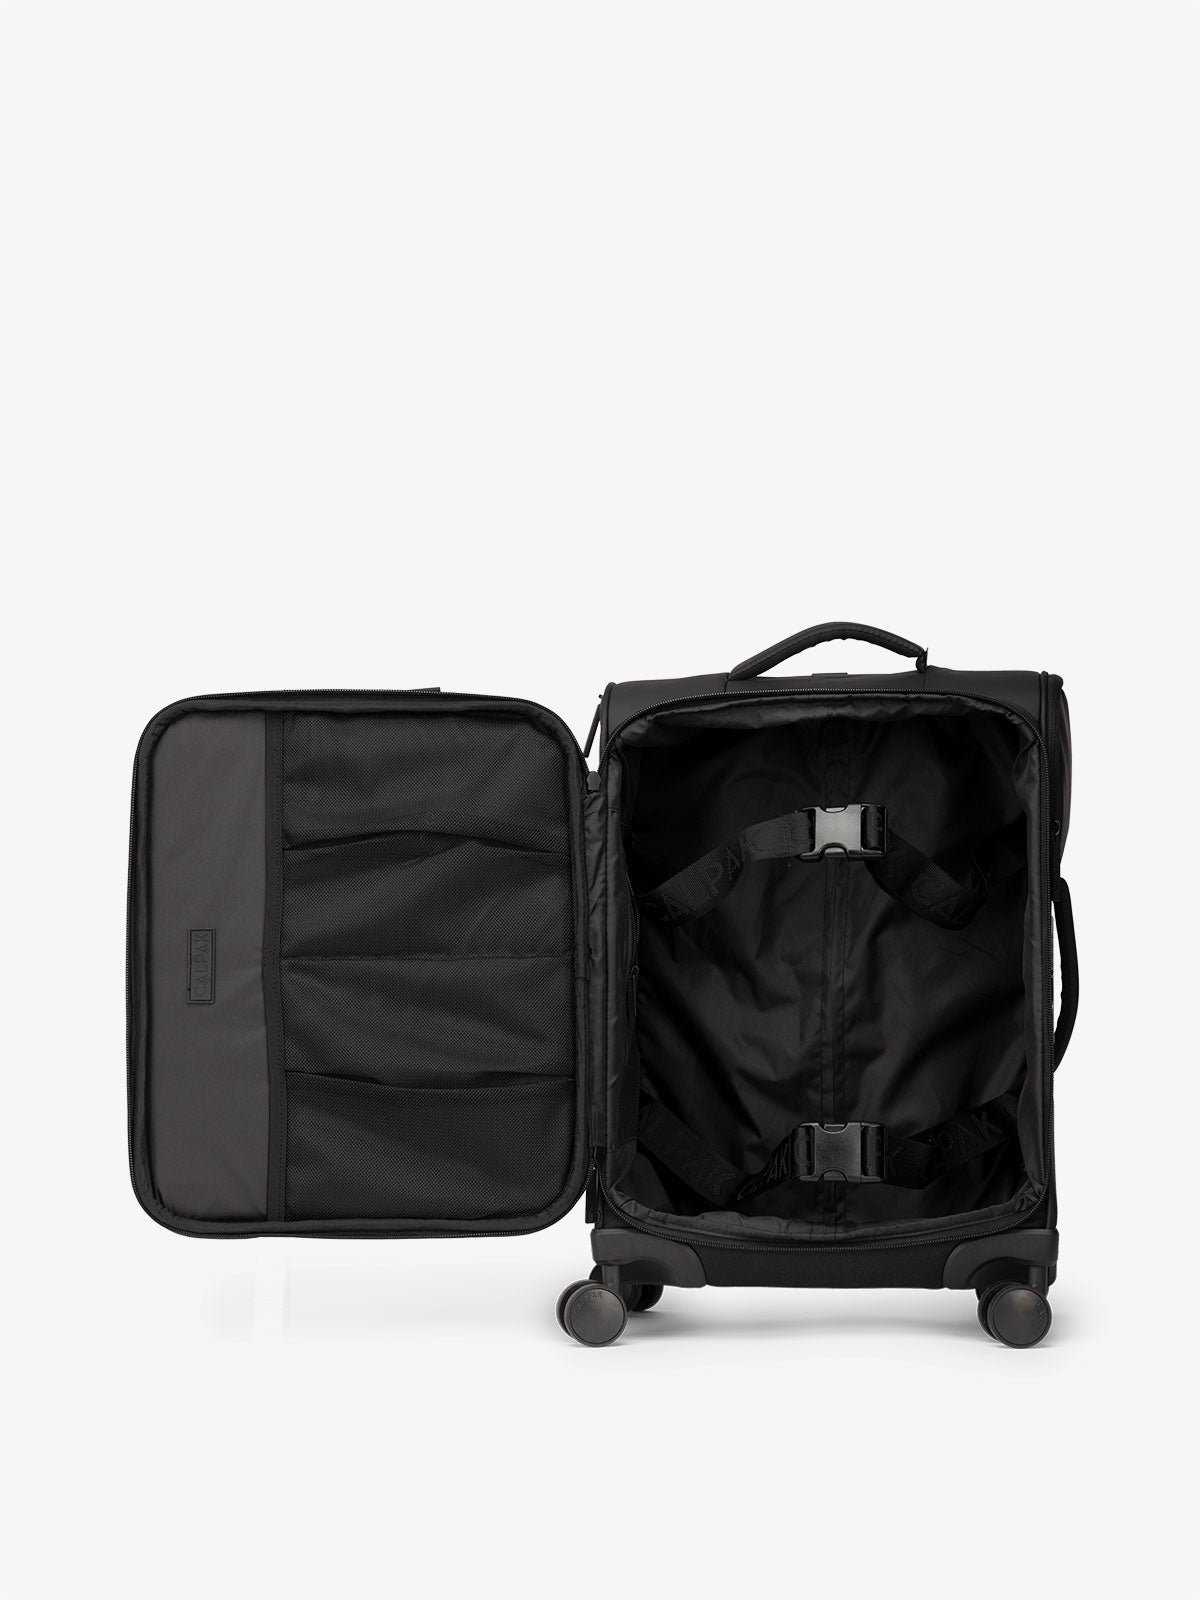 CALPAK Luka soft sided carry on luggage interior with multiple pockets and compression straps in matte black